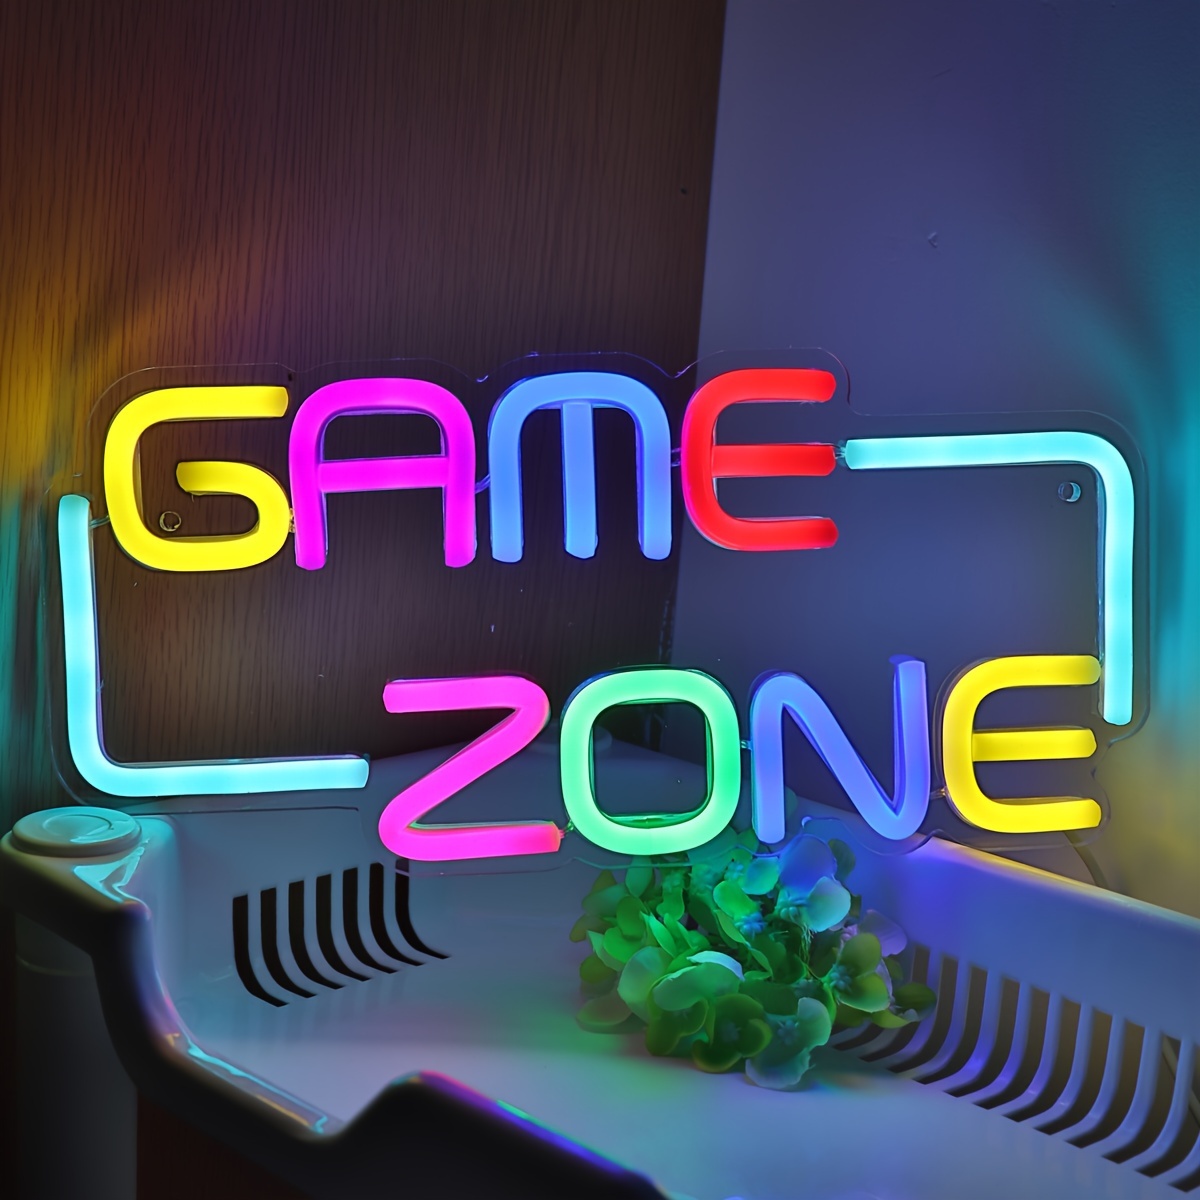 

Game Zone Led Neon Sign - Usb Powered, Wall Hanging, Single Color, Multipurpose Night Light For Gaming Room, Home, Party, Pub, Club - 11.77'' X 5.47'', Plastic With Metal Finish, Switch Control